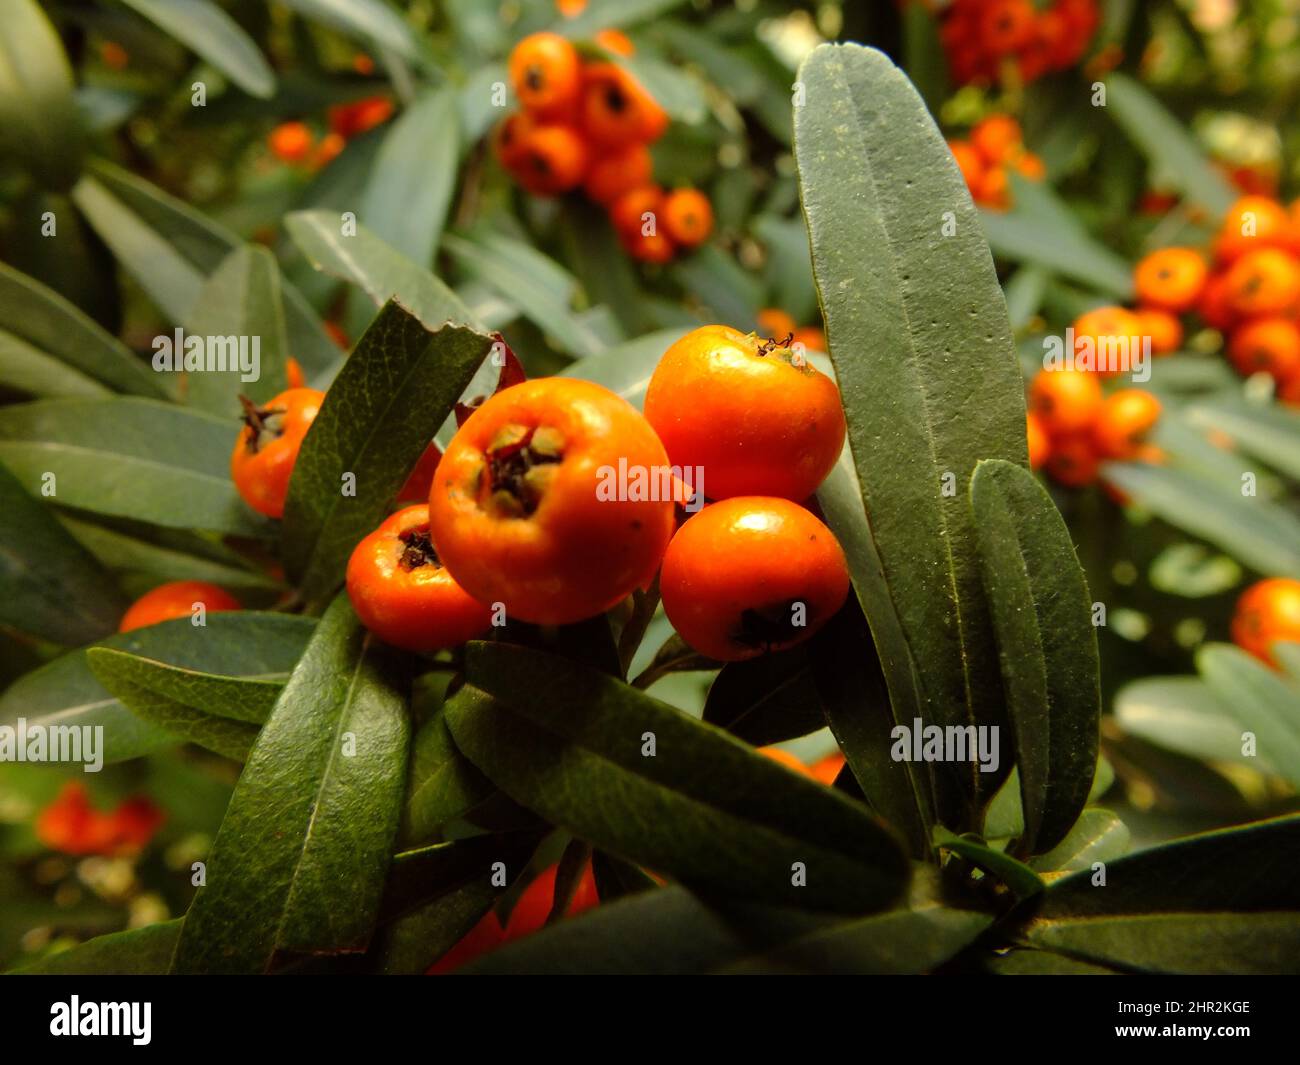 Hawthorn fruit with green leaves background, small raw pome fruits, little orange product, quickthorn, thornapple, May-tree, whitethorn, hawberry Stock Photo